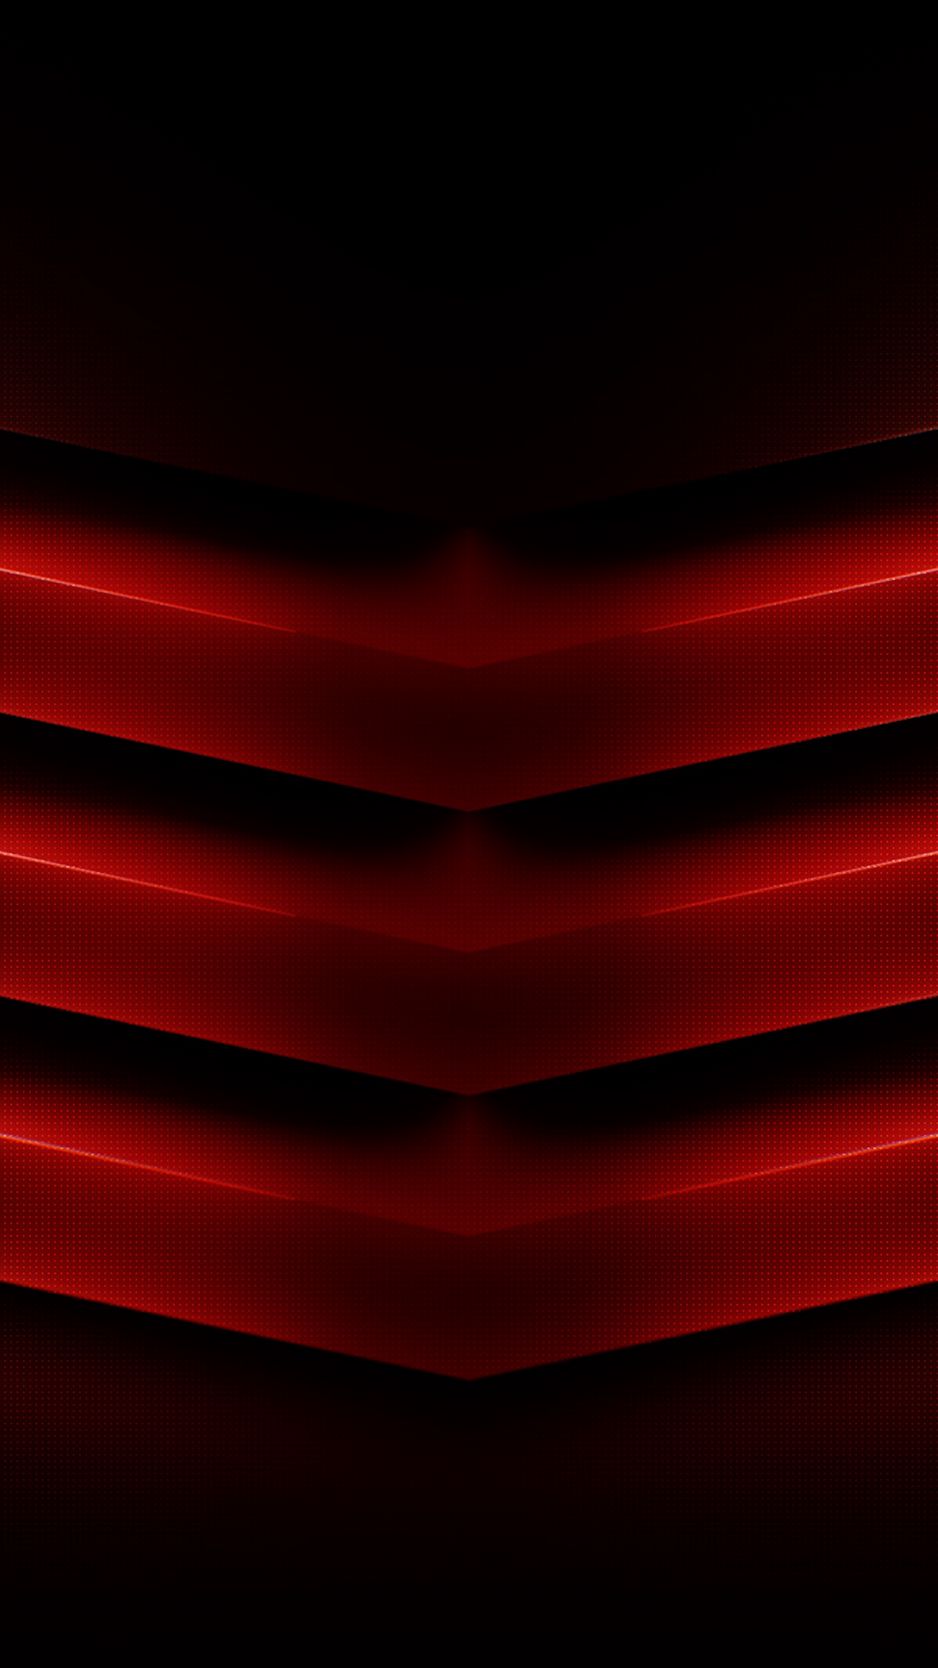 Download wallpaper 938x1668 lines, red, glow, dark, black iphone 8/7/6s/6  for parallax hd background